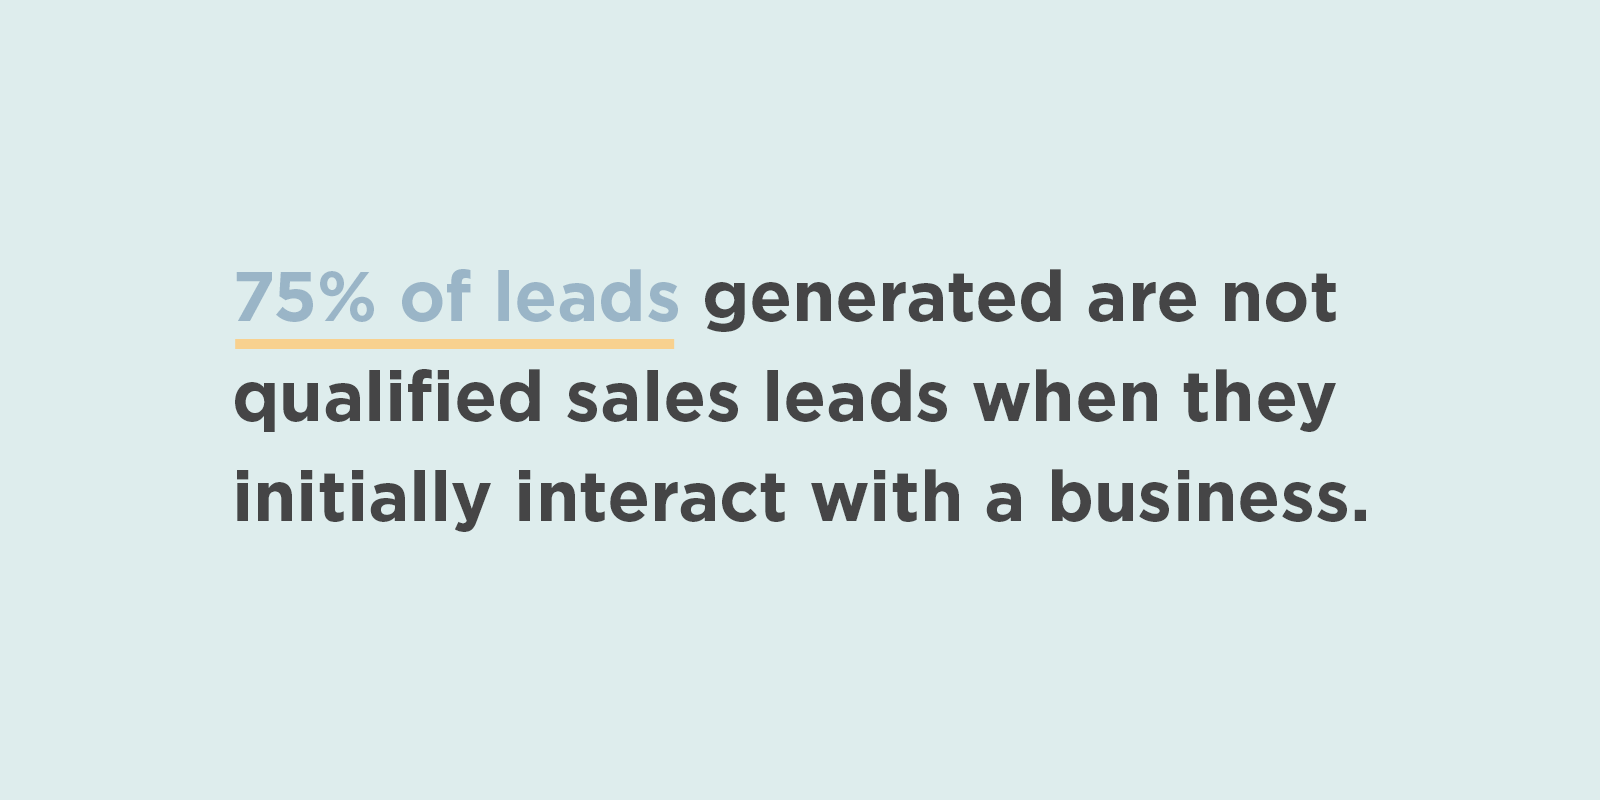 Digital Marketing Statistic75% of leads generated are not qualified sales leads when they initially interact with a business